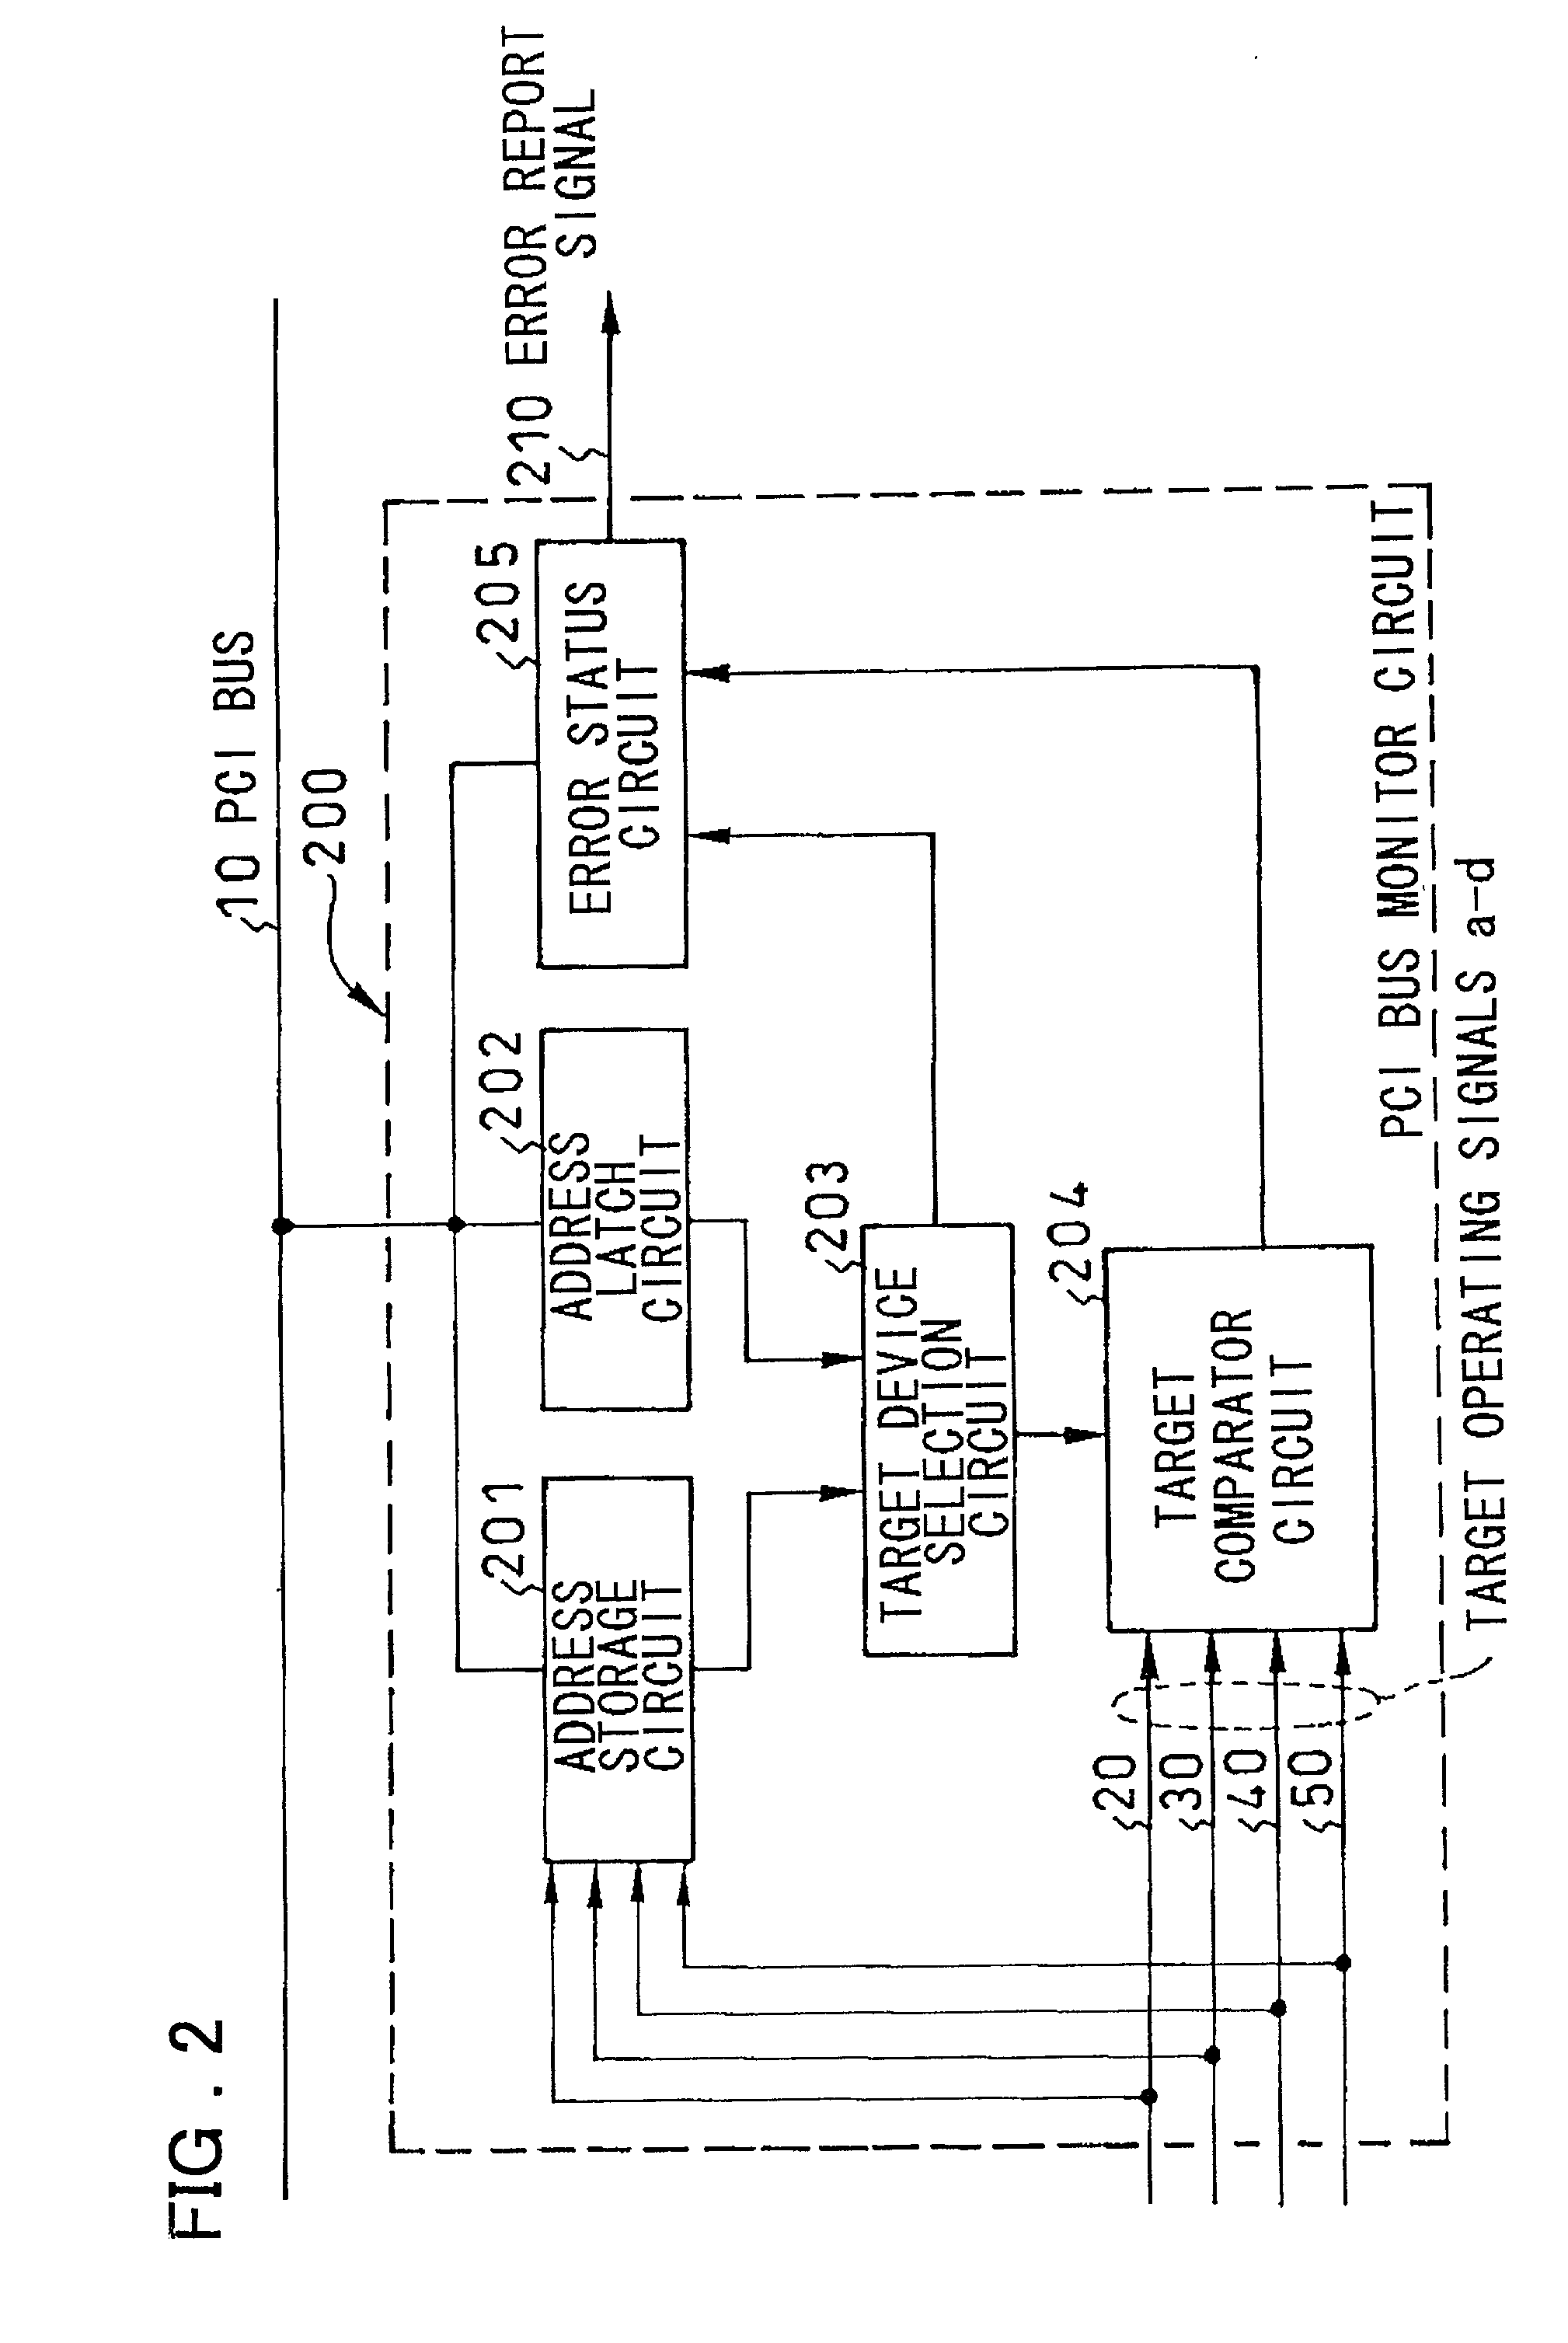 System for facilitated analysis of PCI bus malfuntion